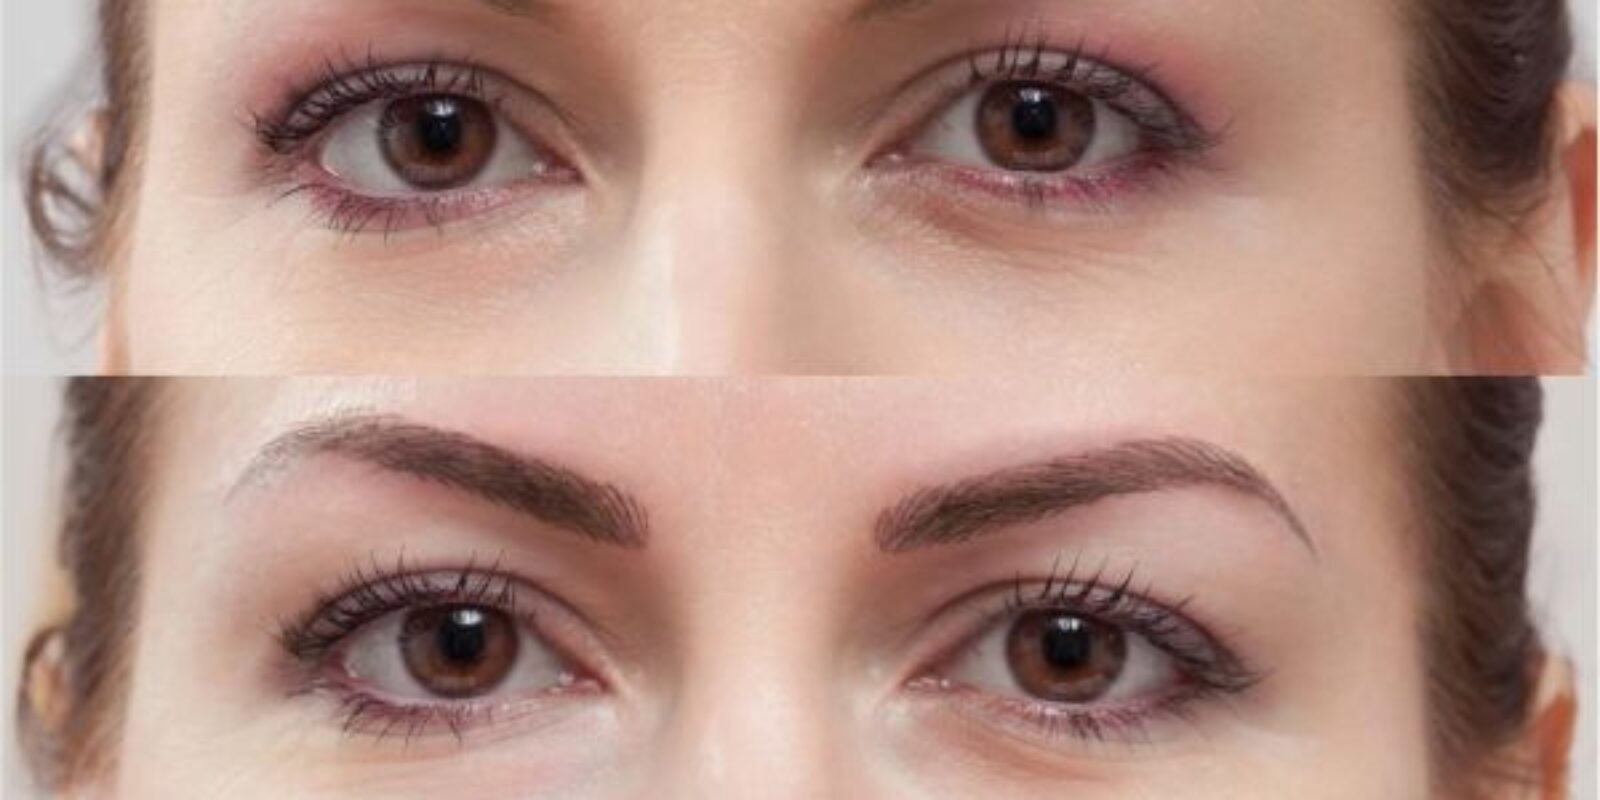 Things You Need to Know About Microblading Eyebrows